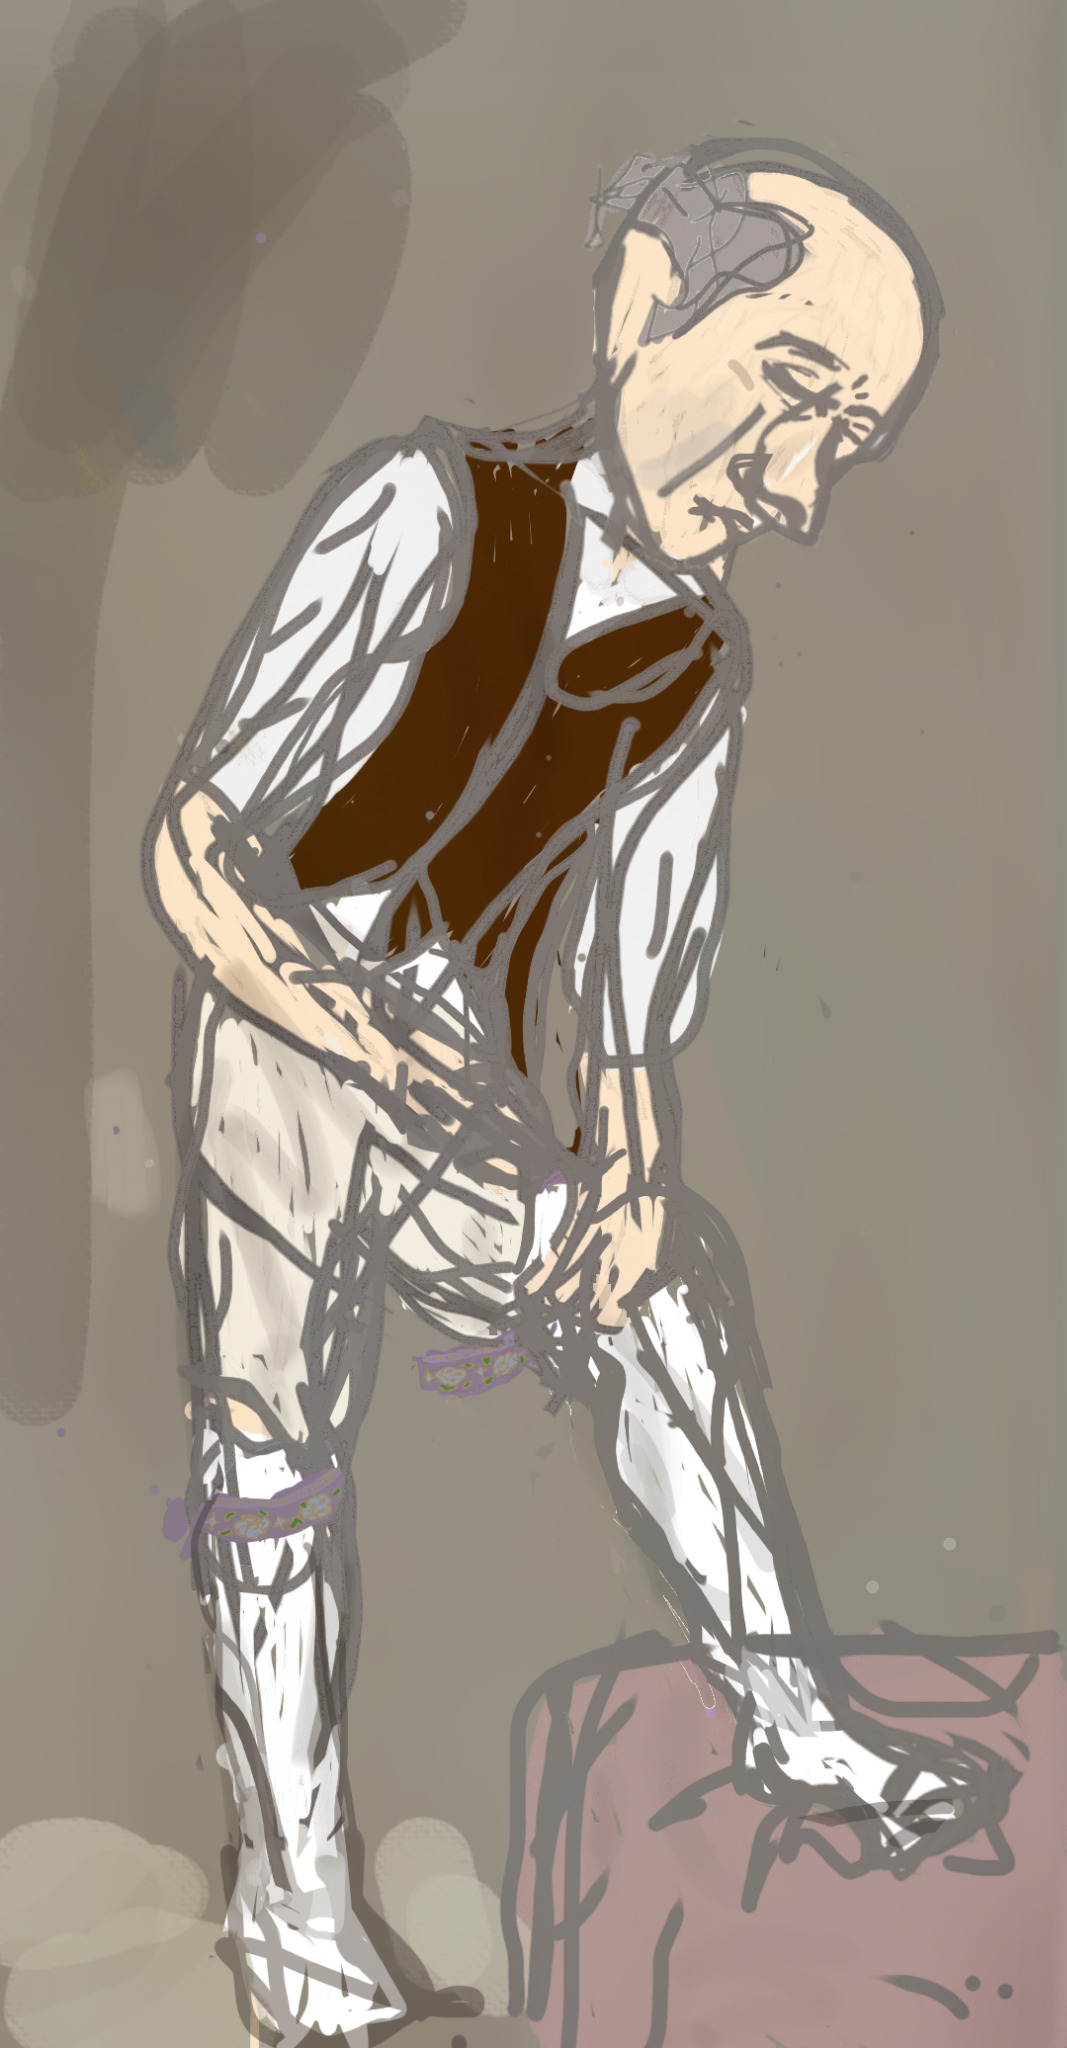 digital art of Alfred from the death gate cycle- a pale, balding person in historical clothing- specifically historical underclothing: a white shirt, sleeves rolled up, a brown vest, beige thigh length  underpants, and silky white stockings going up above the knee, one already held in place by an intricately patterned purple ribbon. He is leaning forward to tie the other around his thigh, resting his leg up on something, with an expression of serene concentration. The background is lit warmly.